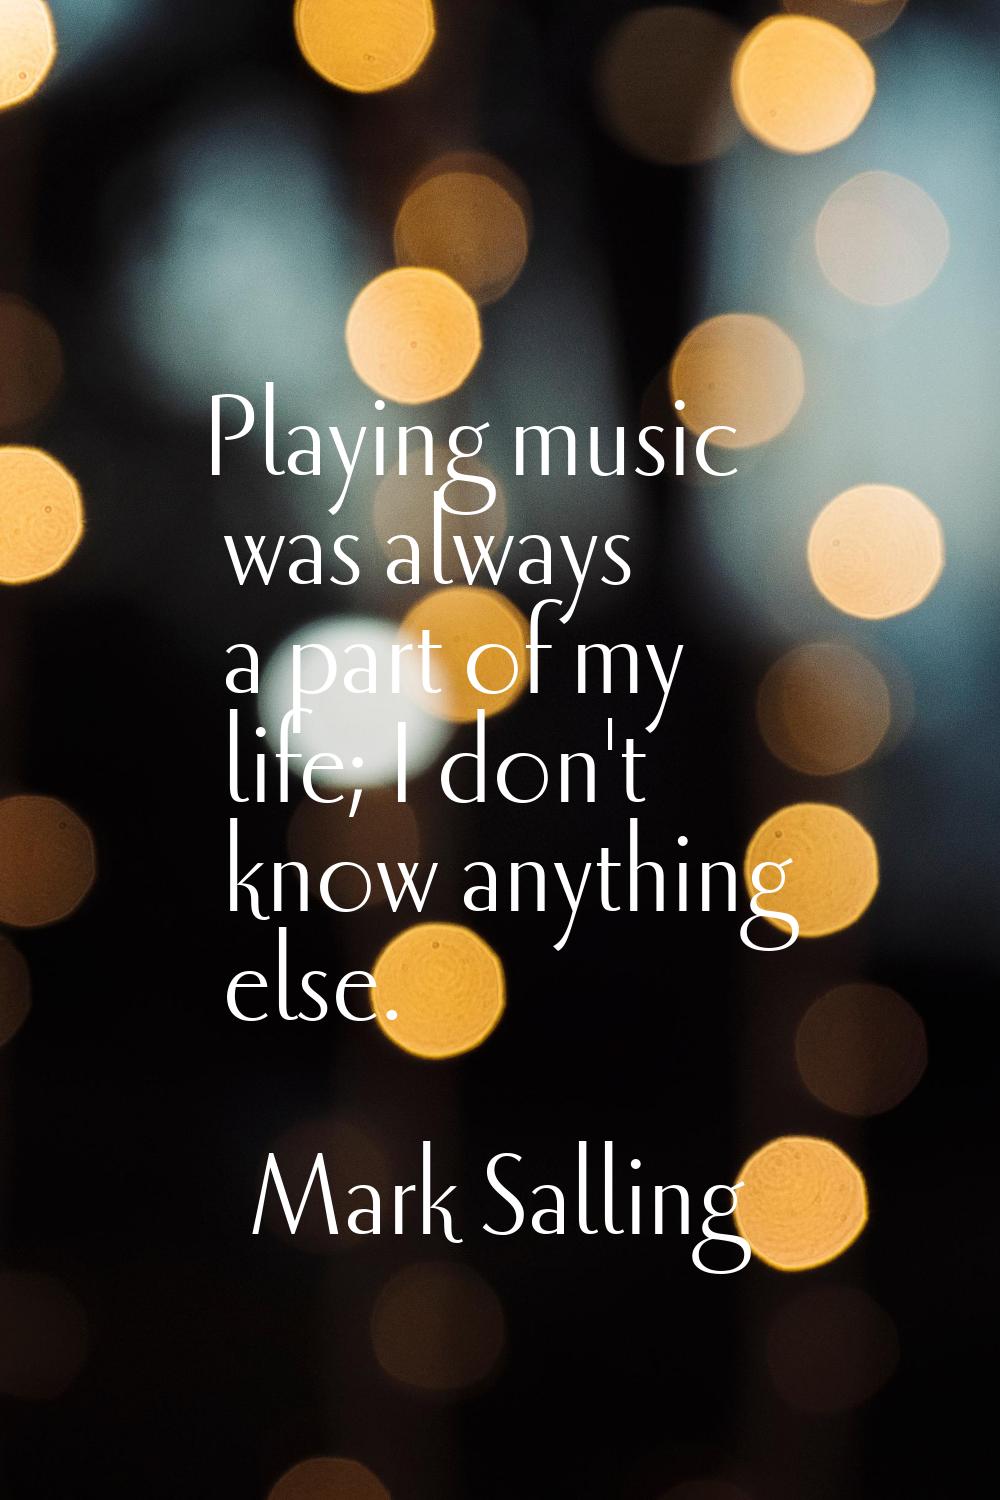 Playing music was always a part of my life; I don't know anything else.